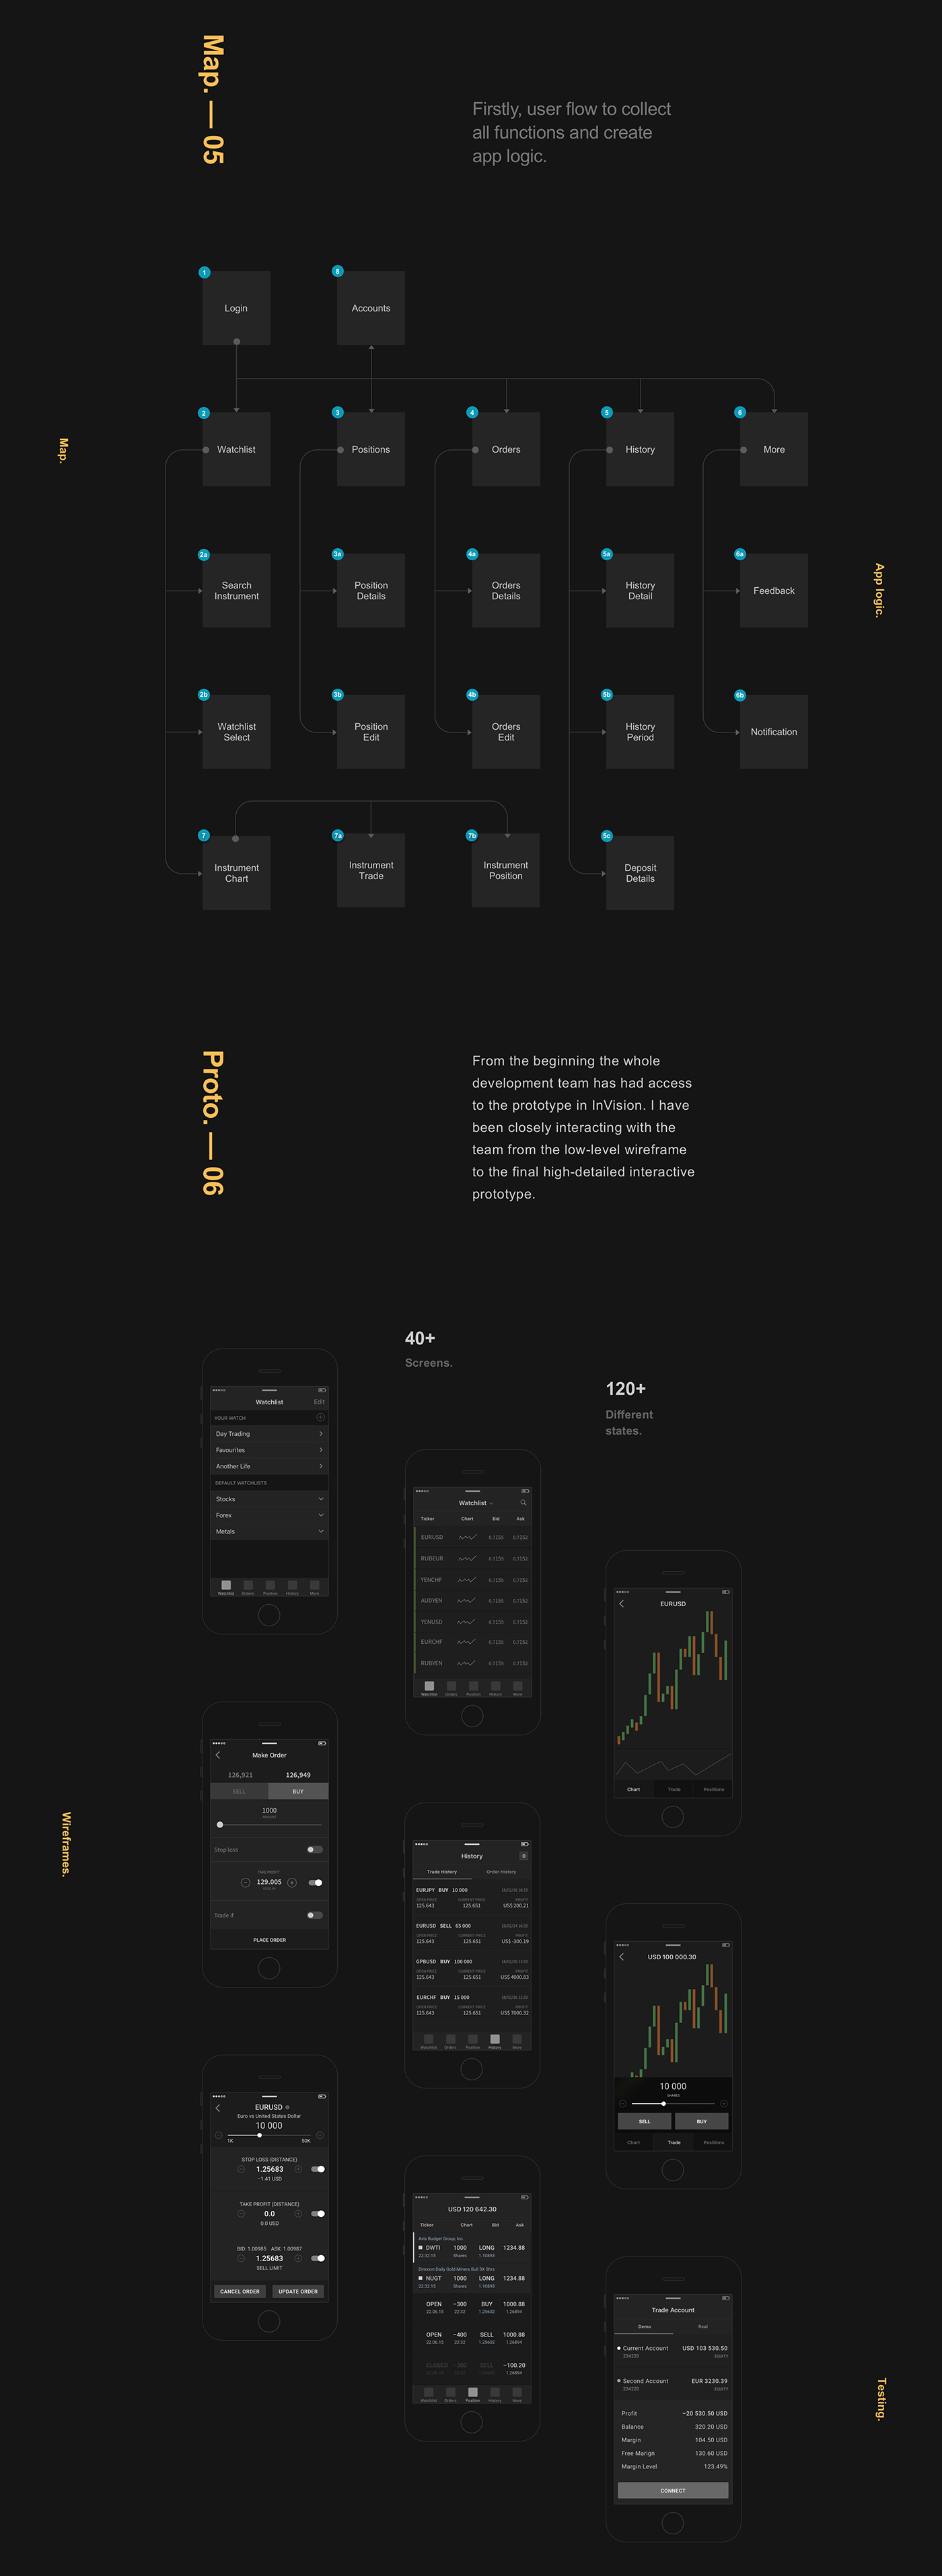 app ux UI interaction Forex Fintech ios android trading stocks